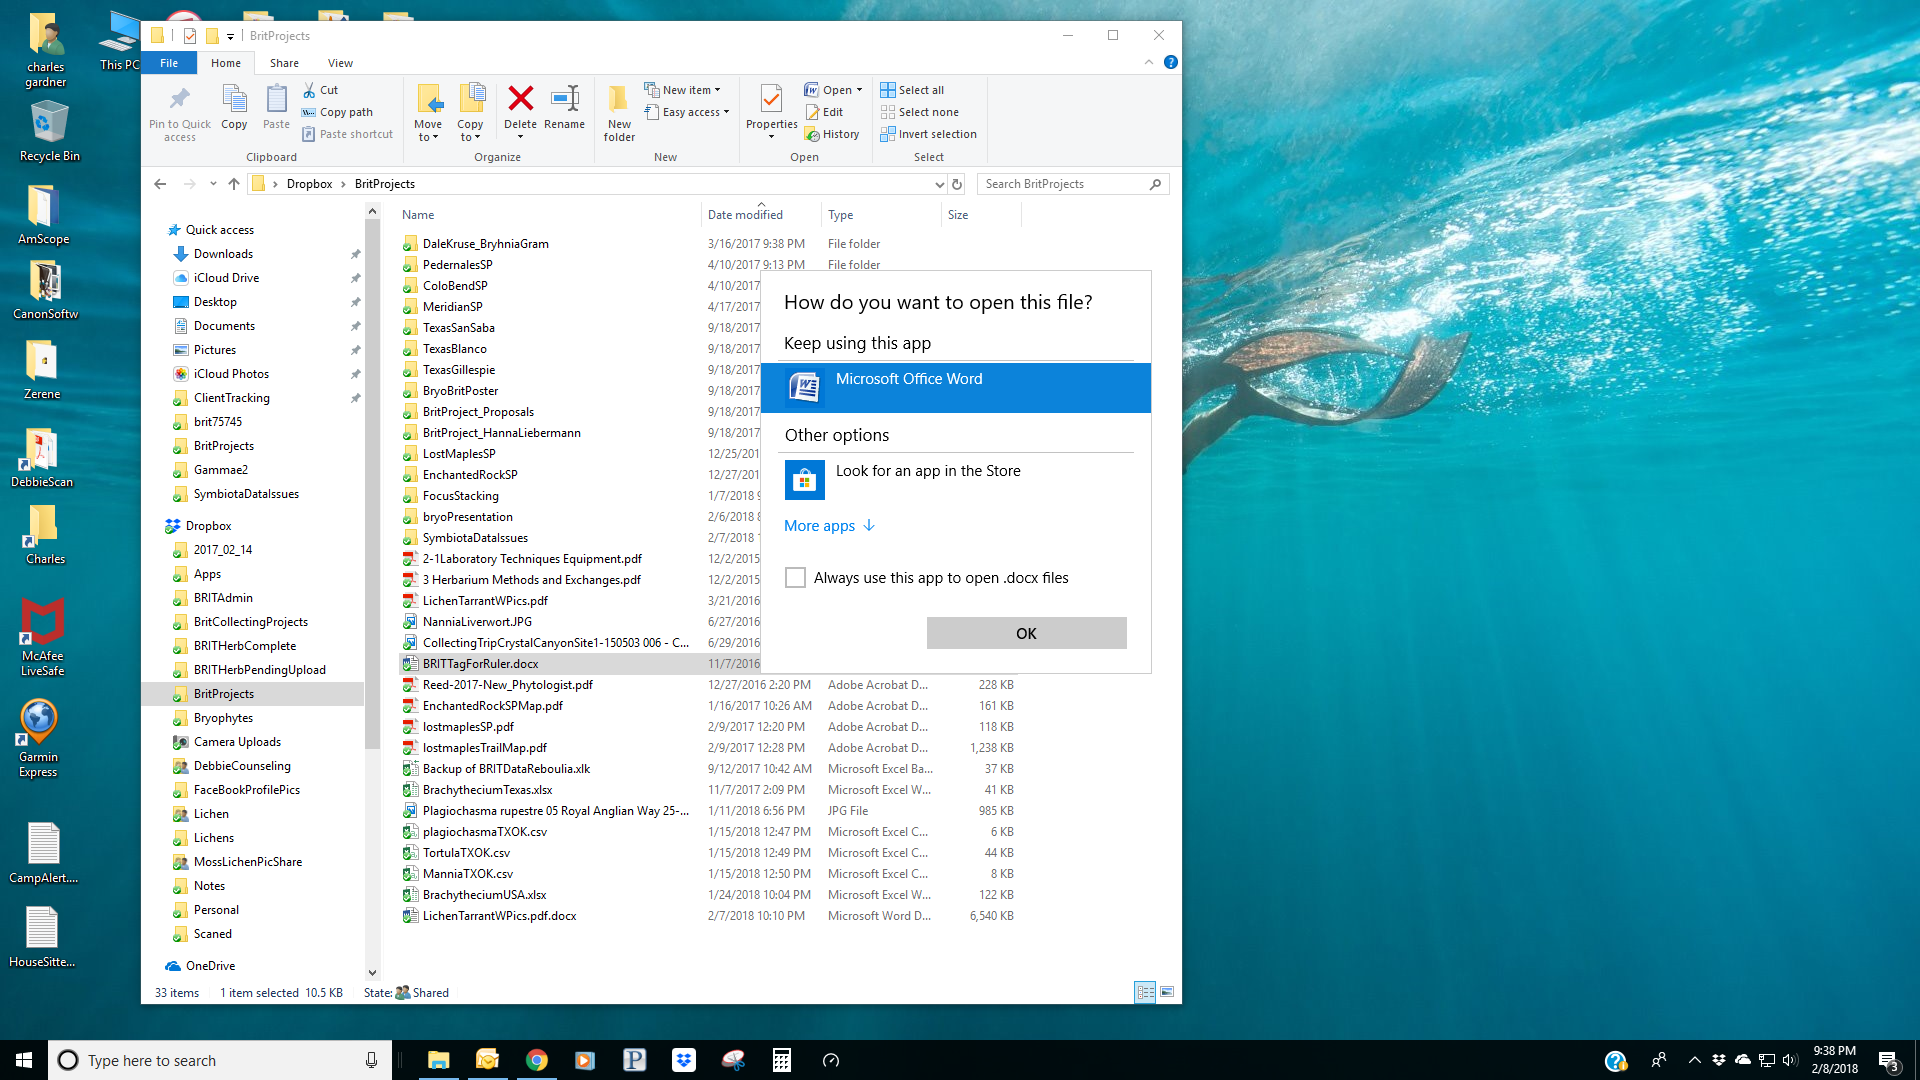 Cannot change defaults using office 2016 and Windows 10 891bca0b-fb24-4859-a4a9-f06ea989f105?upload=true.png